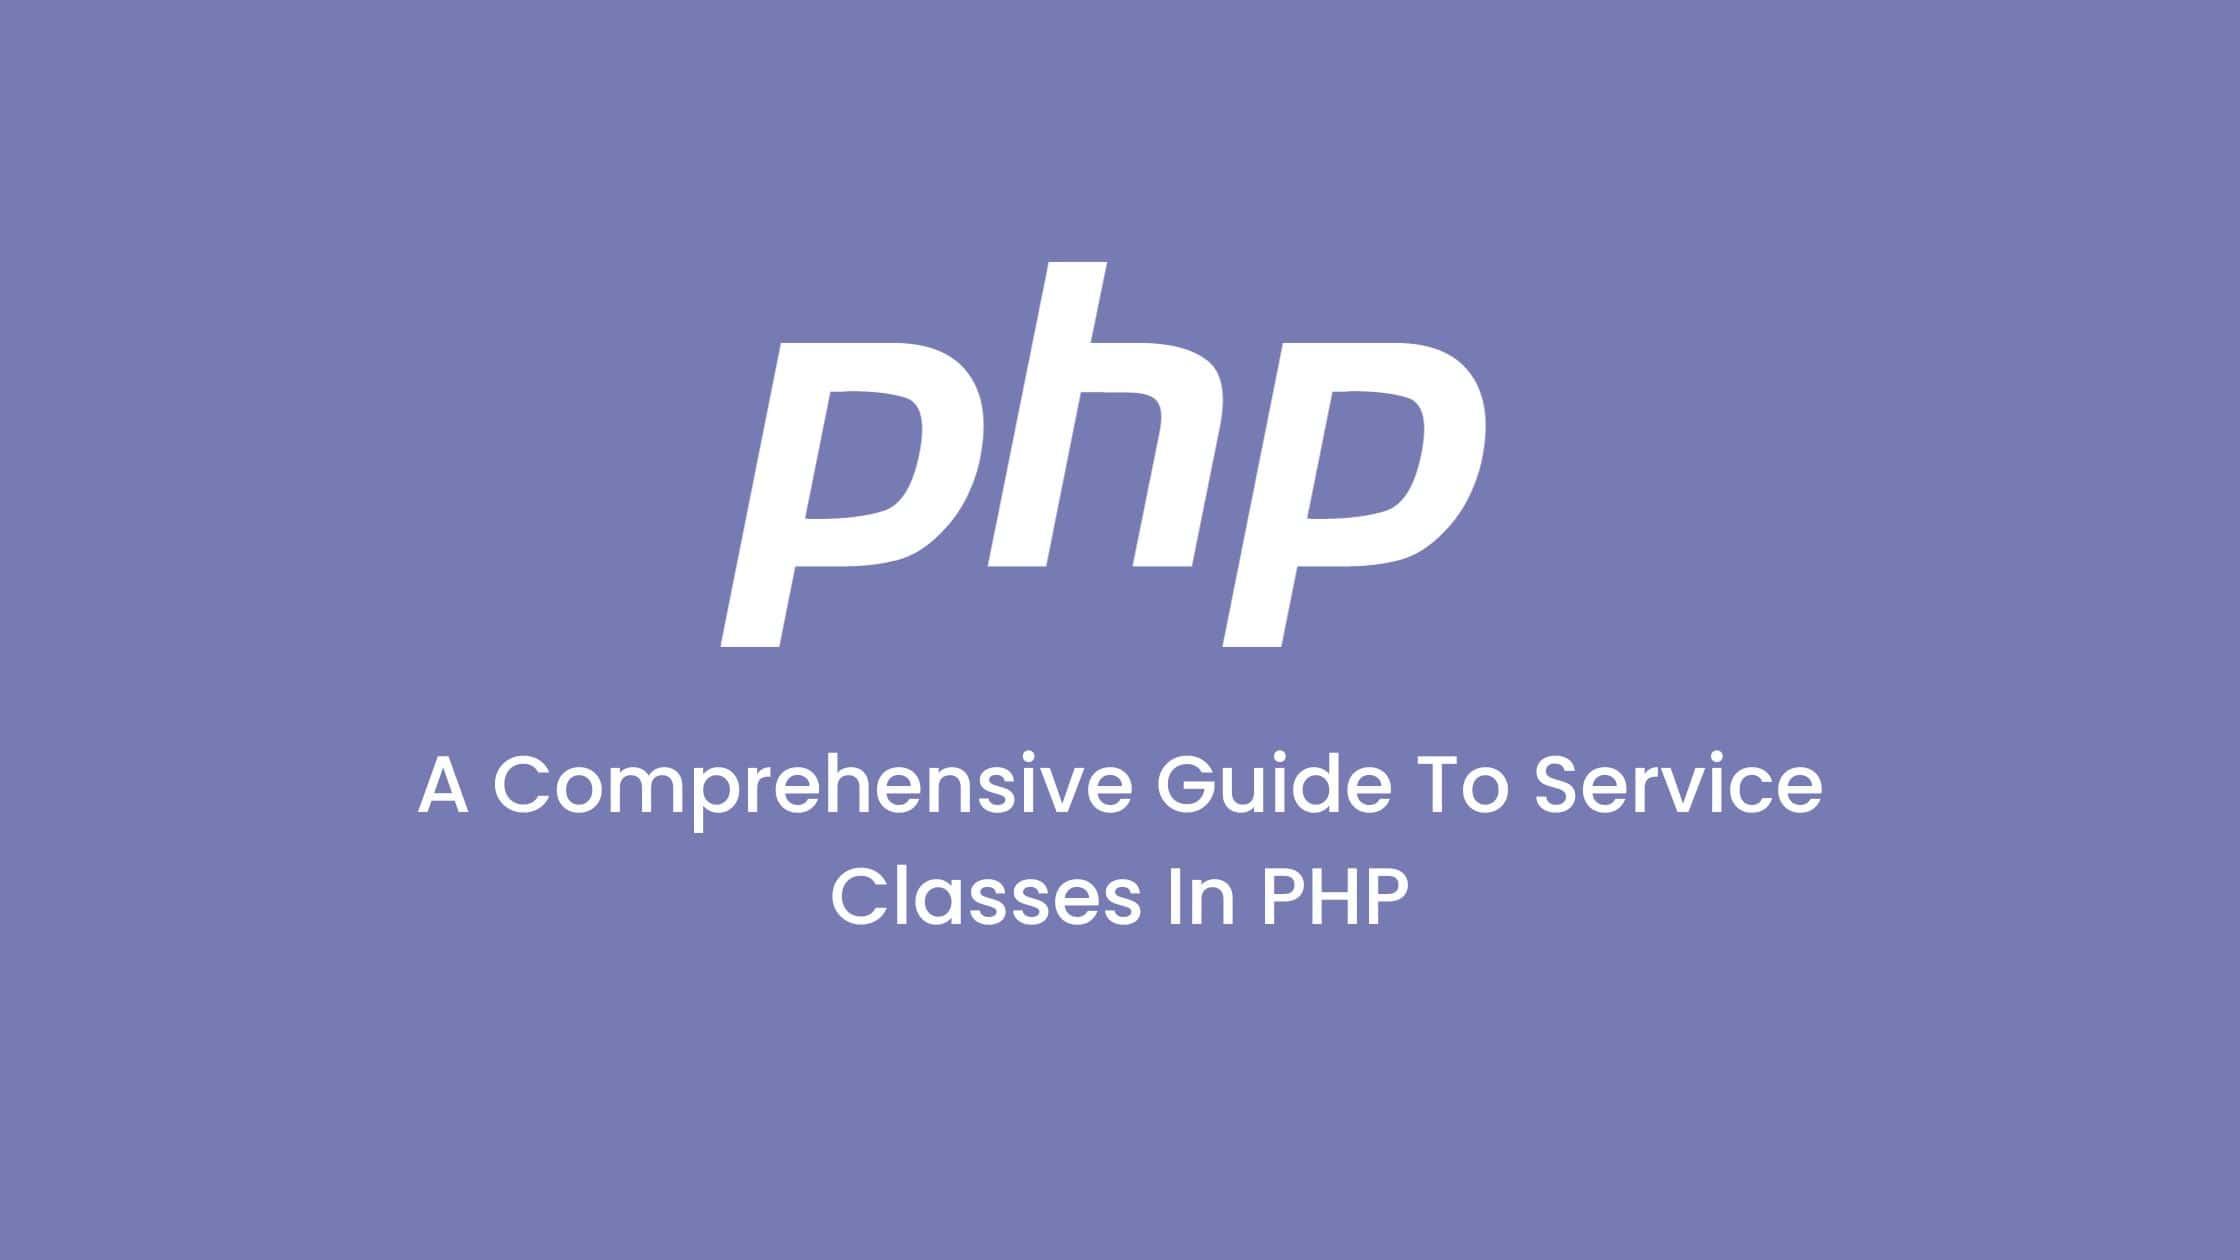 PHP Custom Exception Class: Creating and throwing custom exceptions